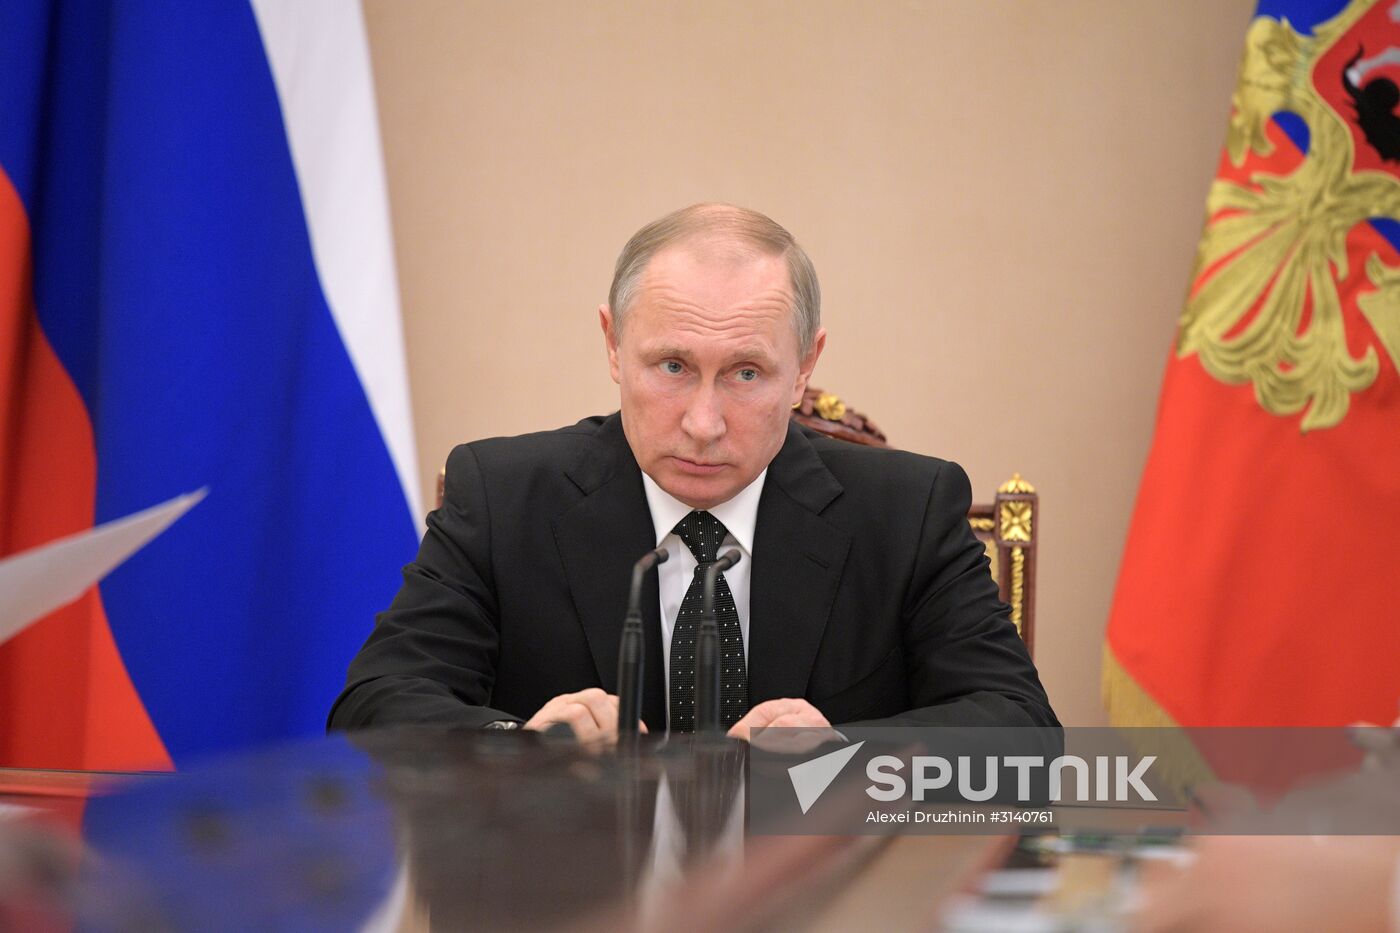 President Vladimir Putin conducts Russian Security Council meeting